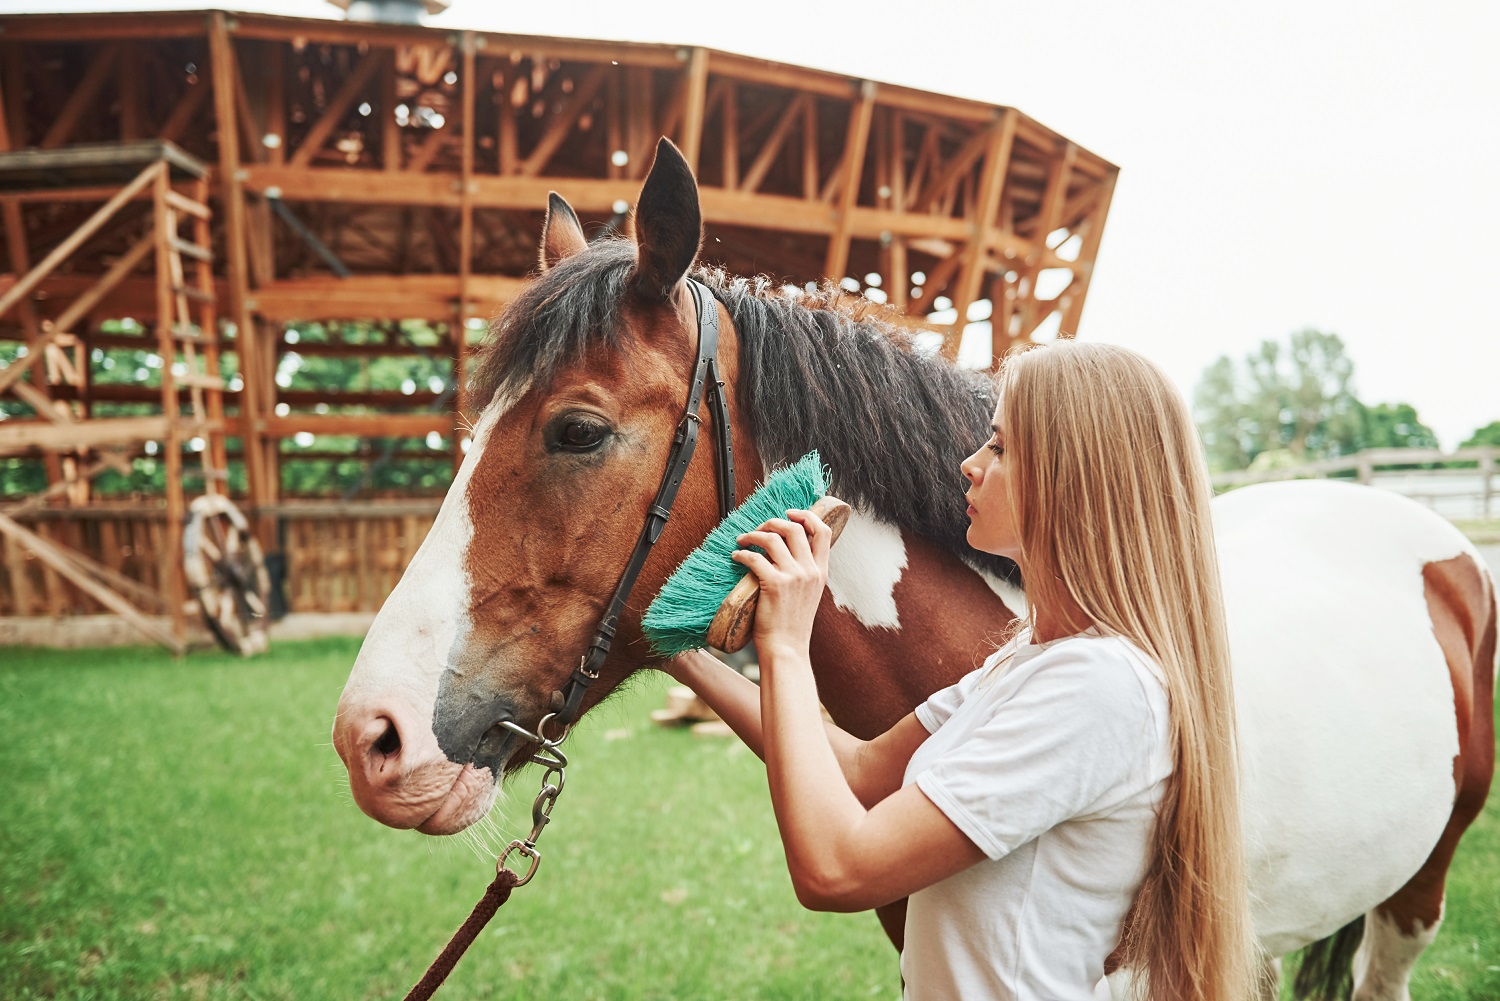 5 steps to groom your horse like a professional